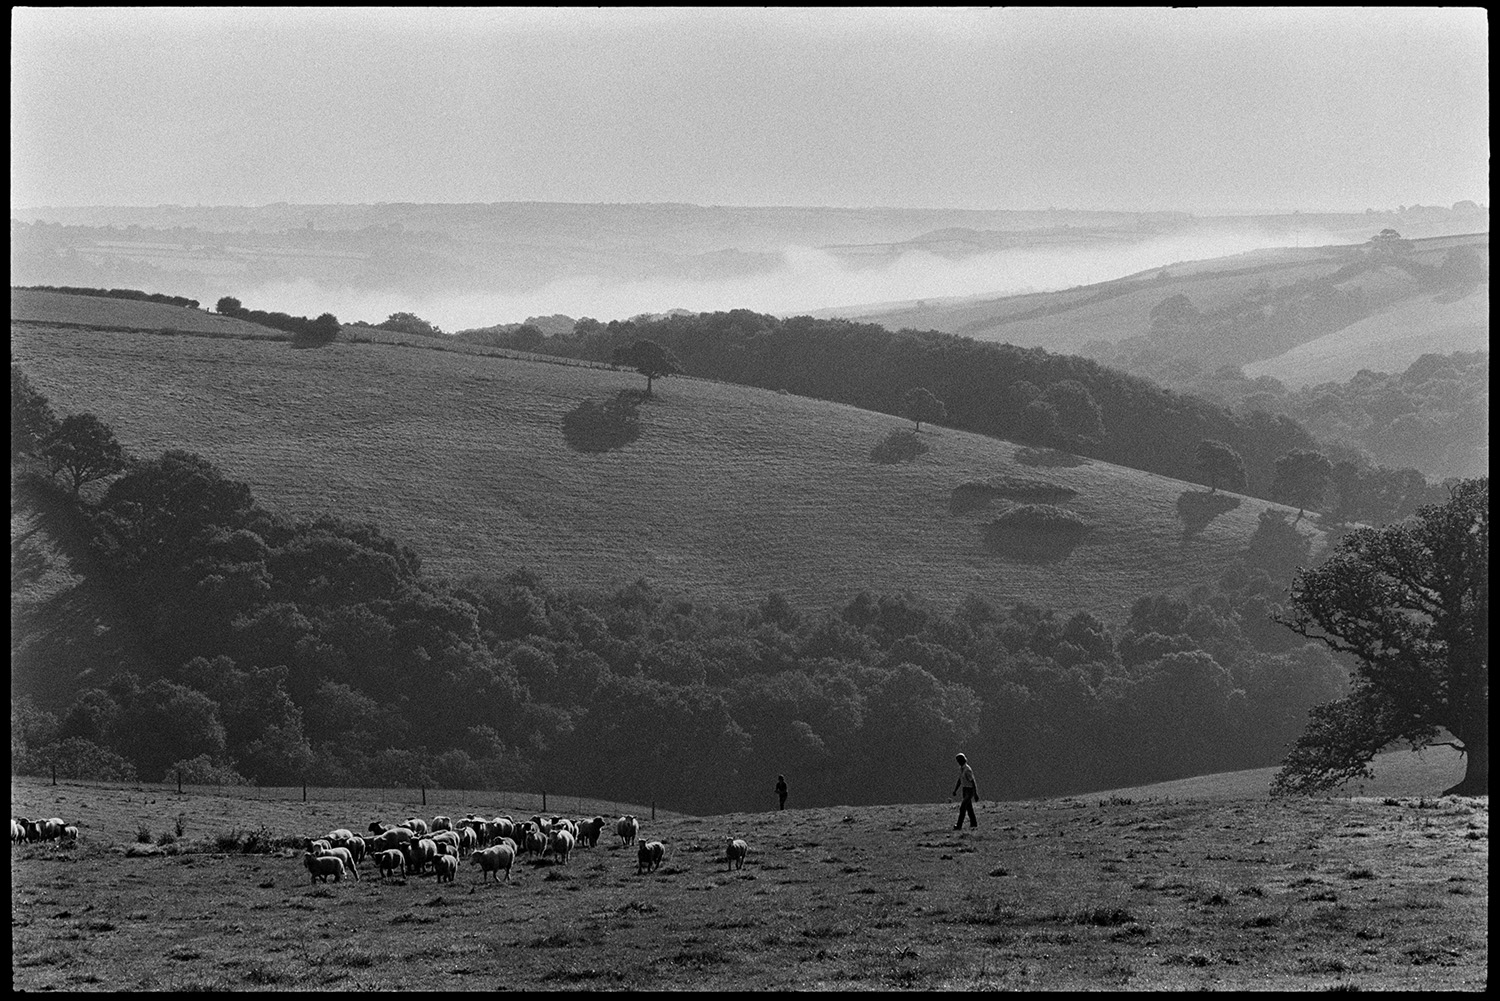 Rounding up sheep, farmyard and distant view, early morning. Bringing in sick lamb. 
[Members of the Cole family rounding up sheep in a field at Densham, Ashreigney. A wooded hillside and mist in a valley can be seen in the background.]